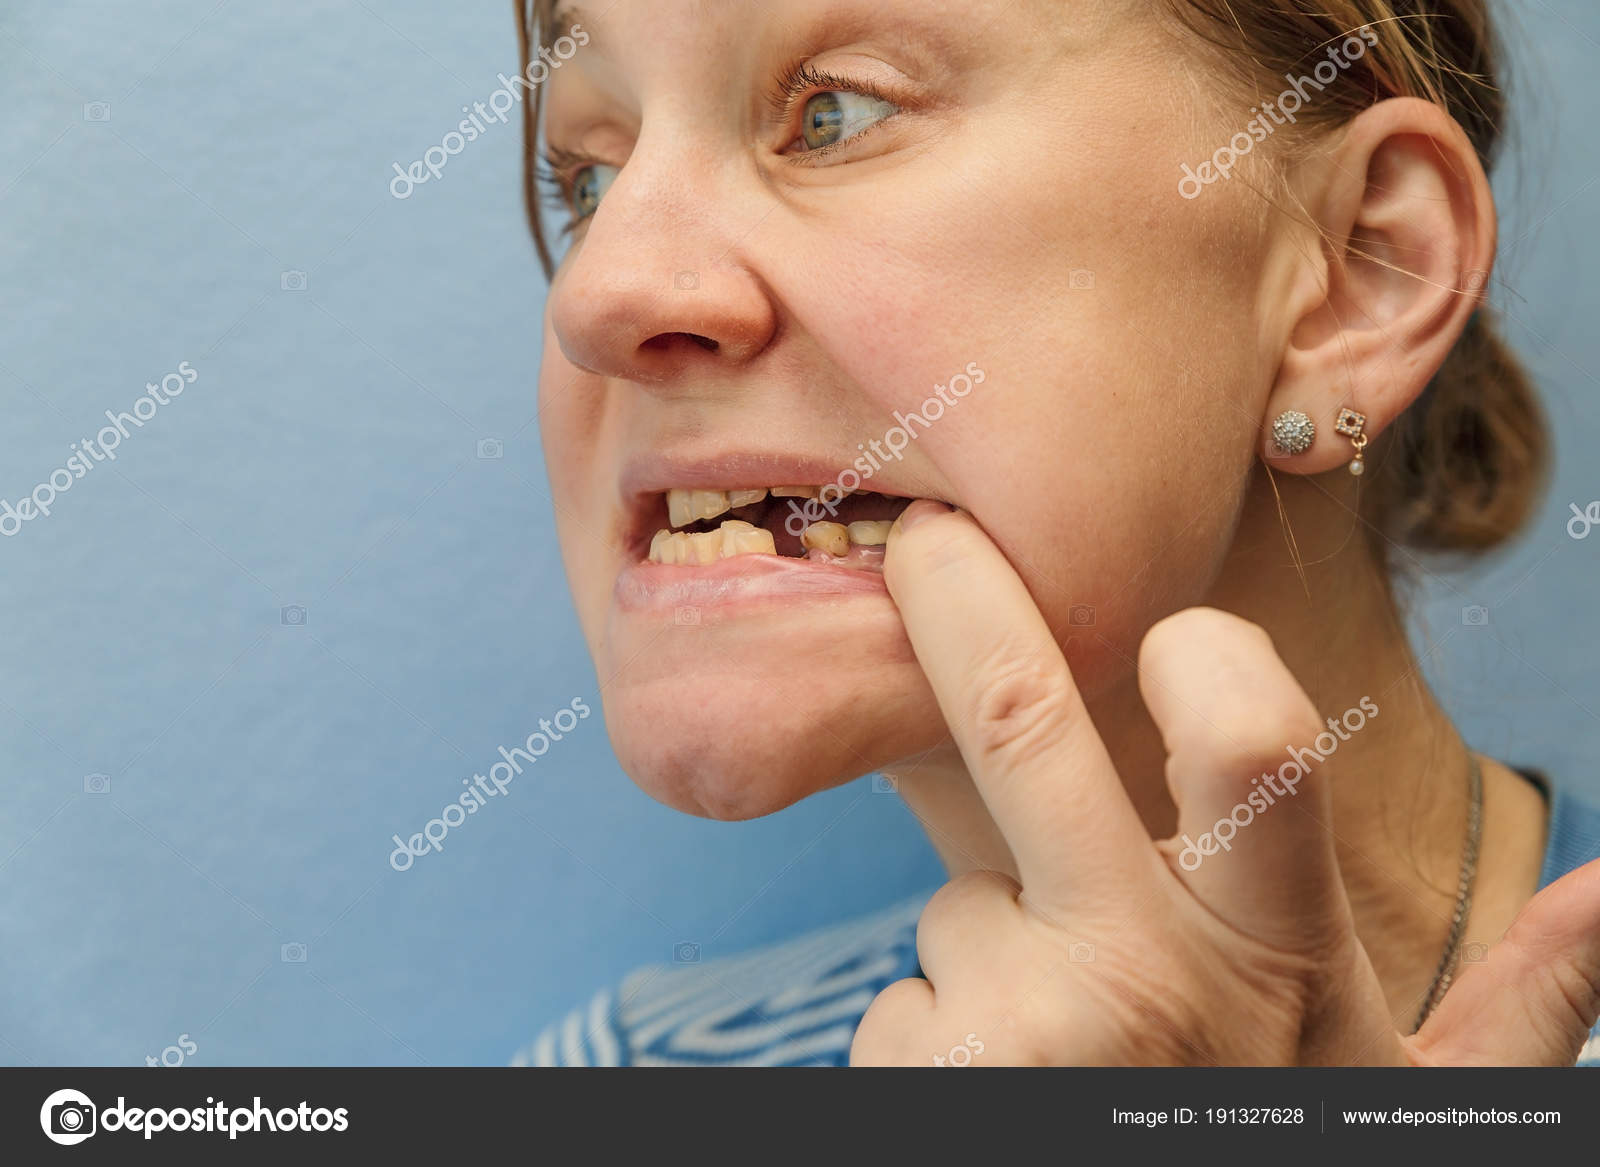 Women without teeth